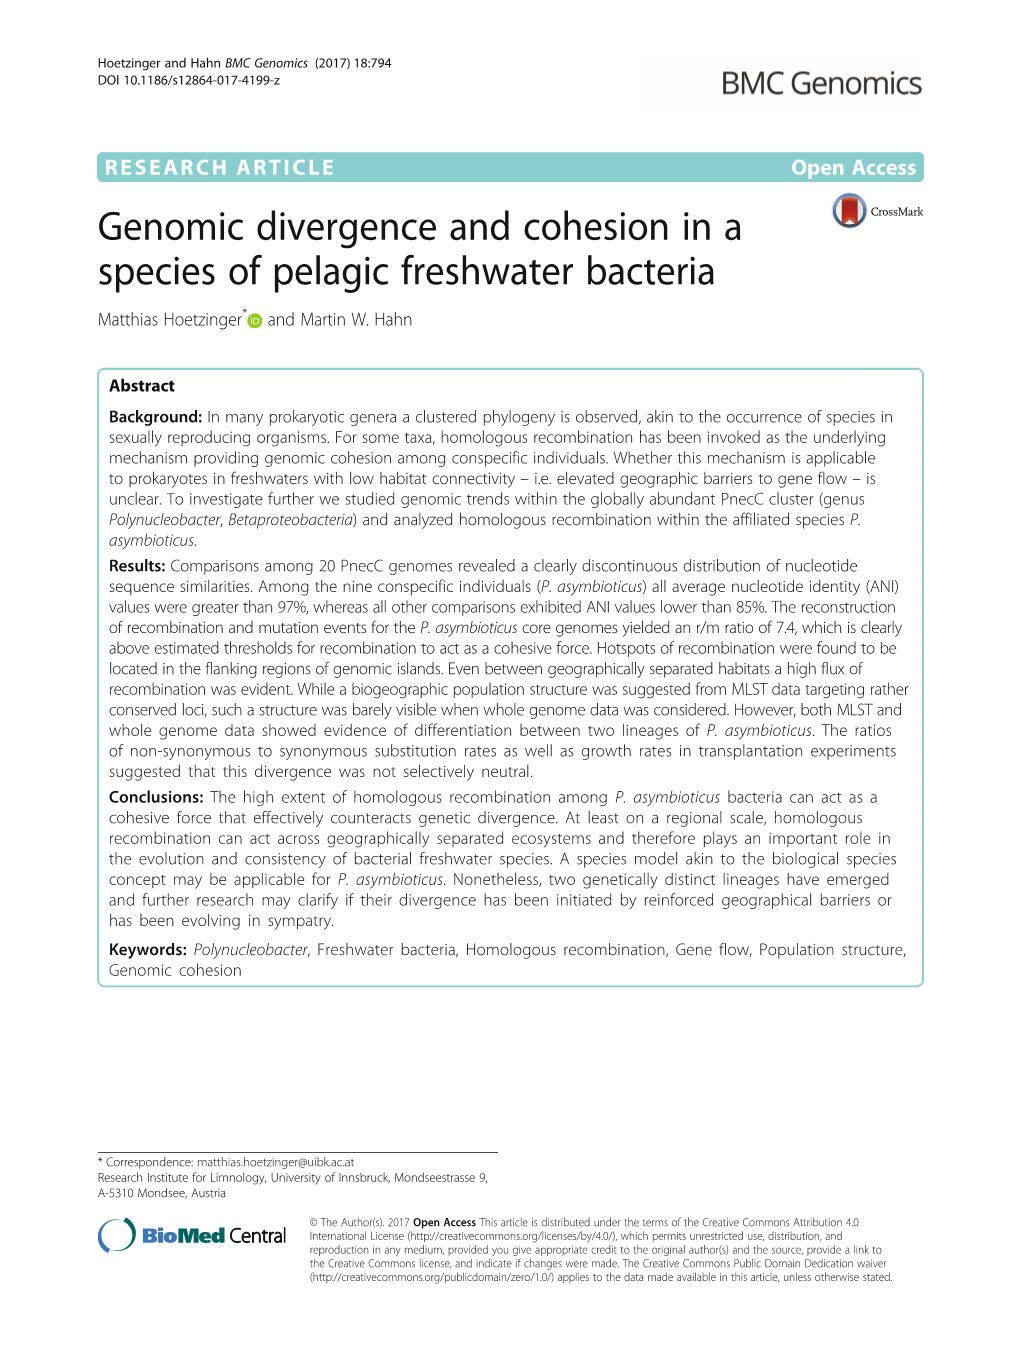 Genomic Divergence and Cohesion in a Species of Pelagic Freshwater Bacteria Matthias Hoetzinger* and Martin W